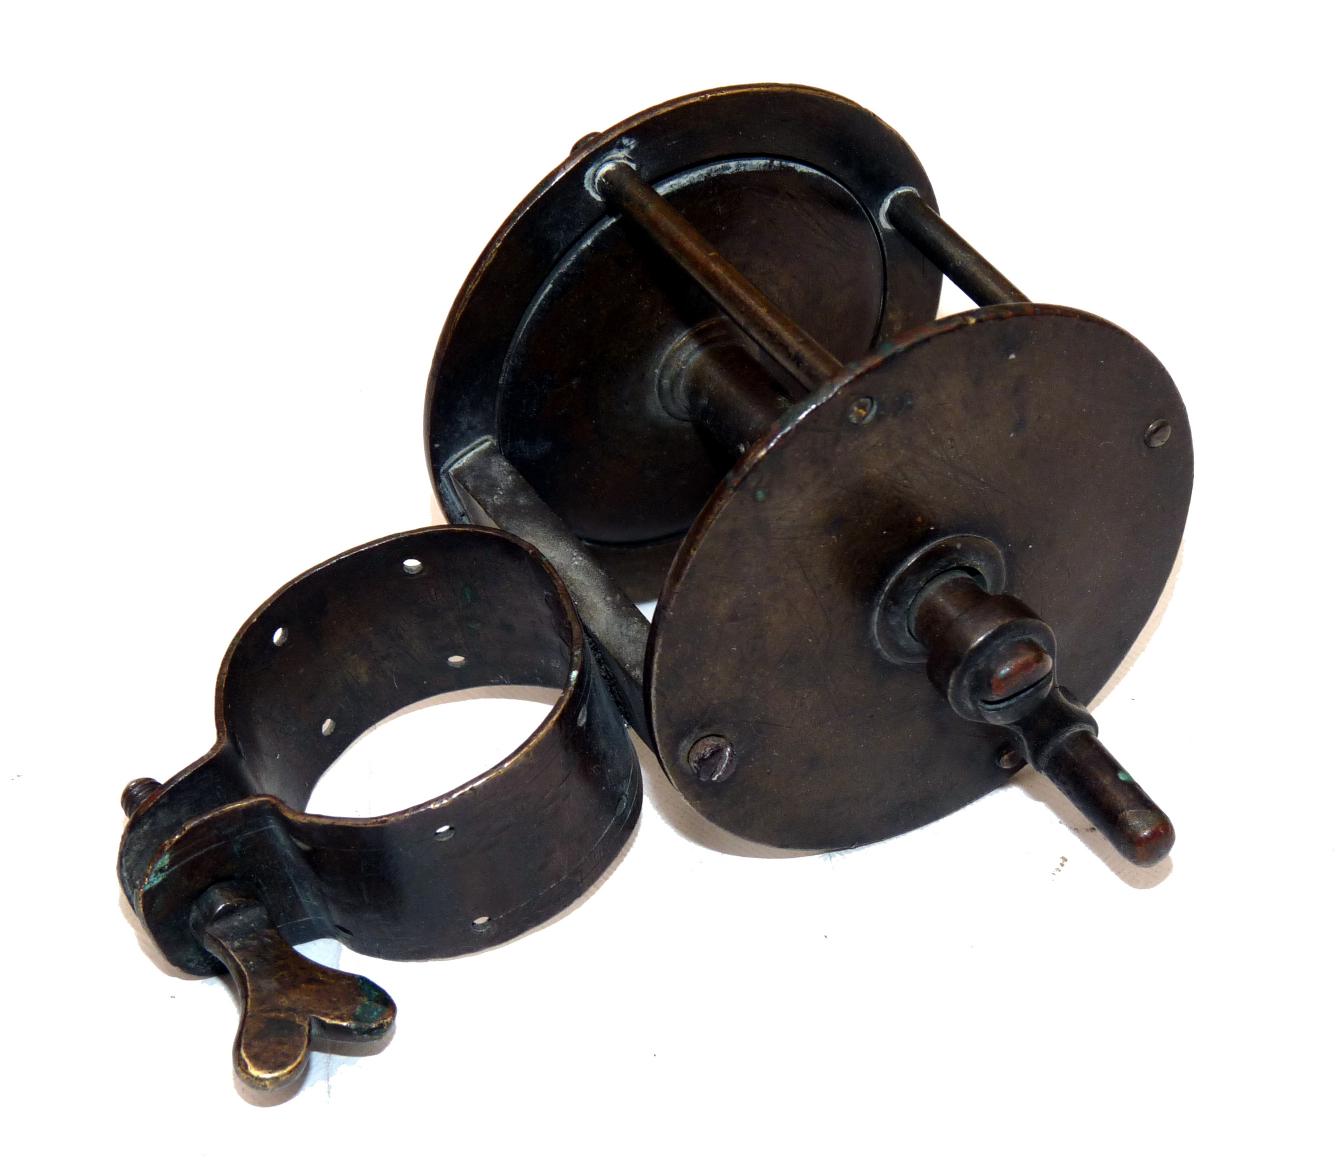 Early British Multiplier Winches - Reely Old Reels